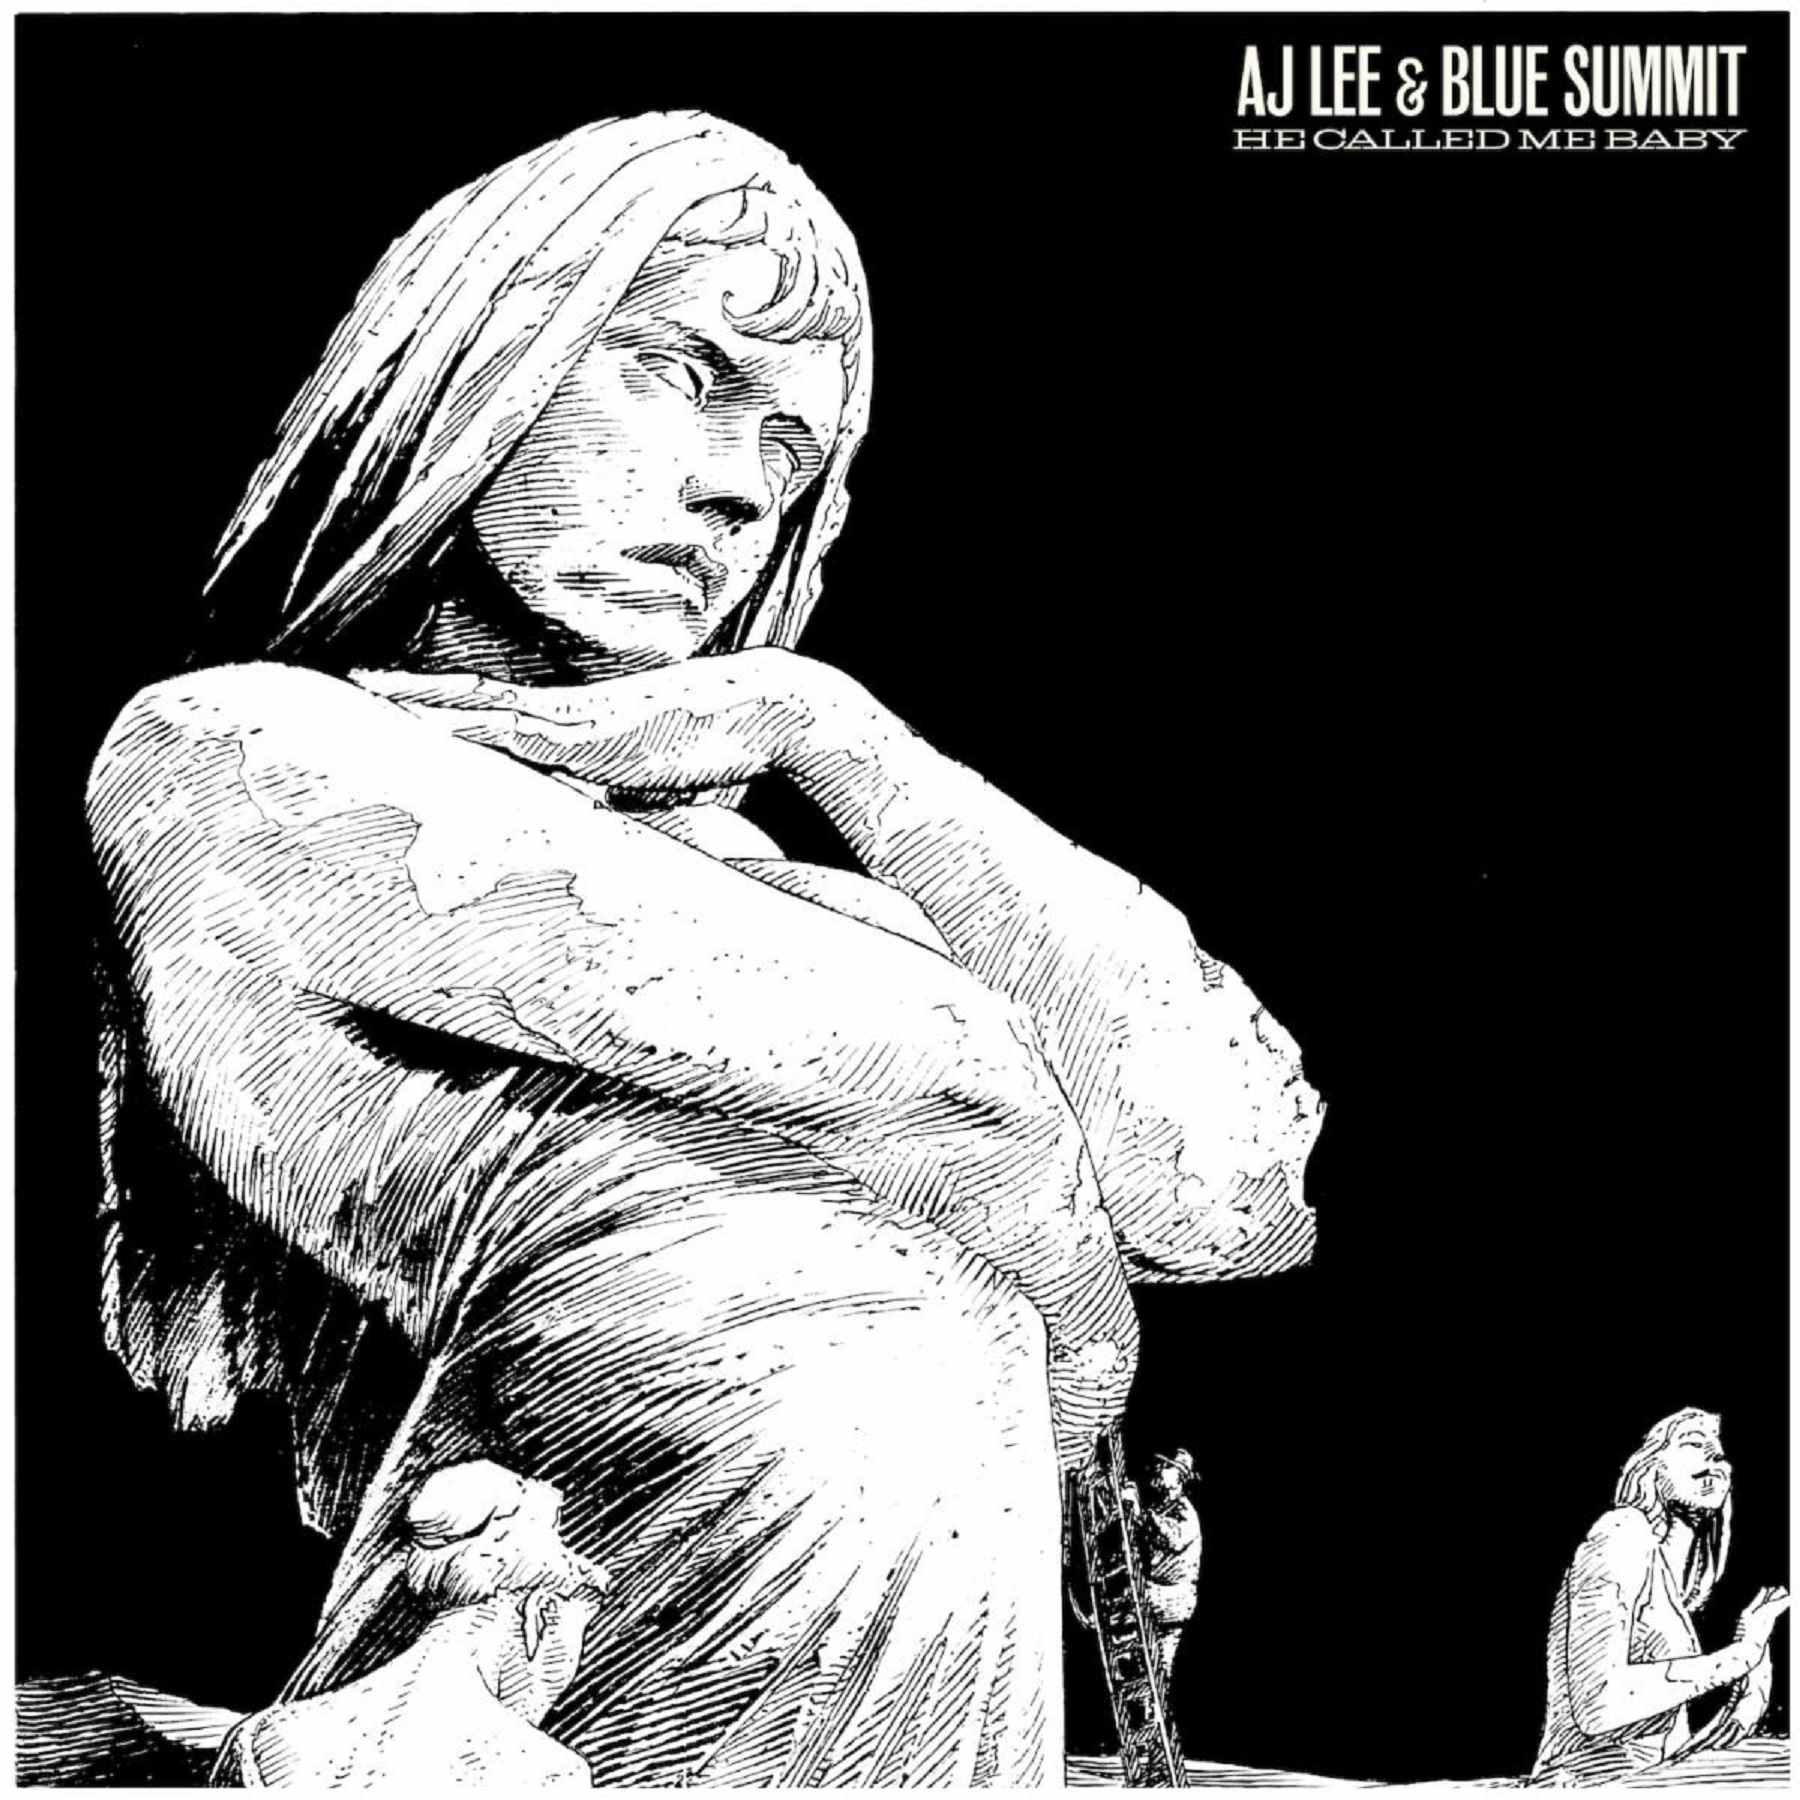 Hear AJ Lee & Blue Summit Lock Into Their Natural Groove On “He Called Me Baby”